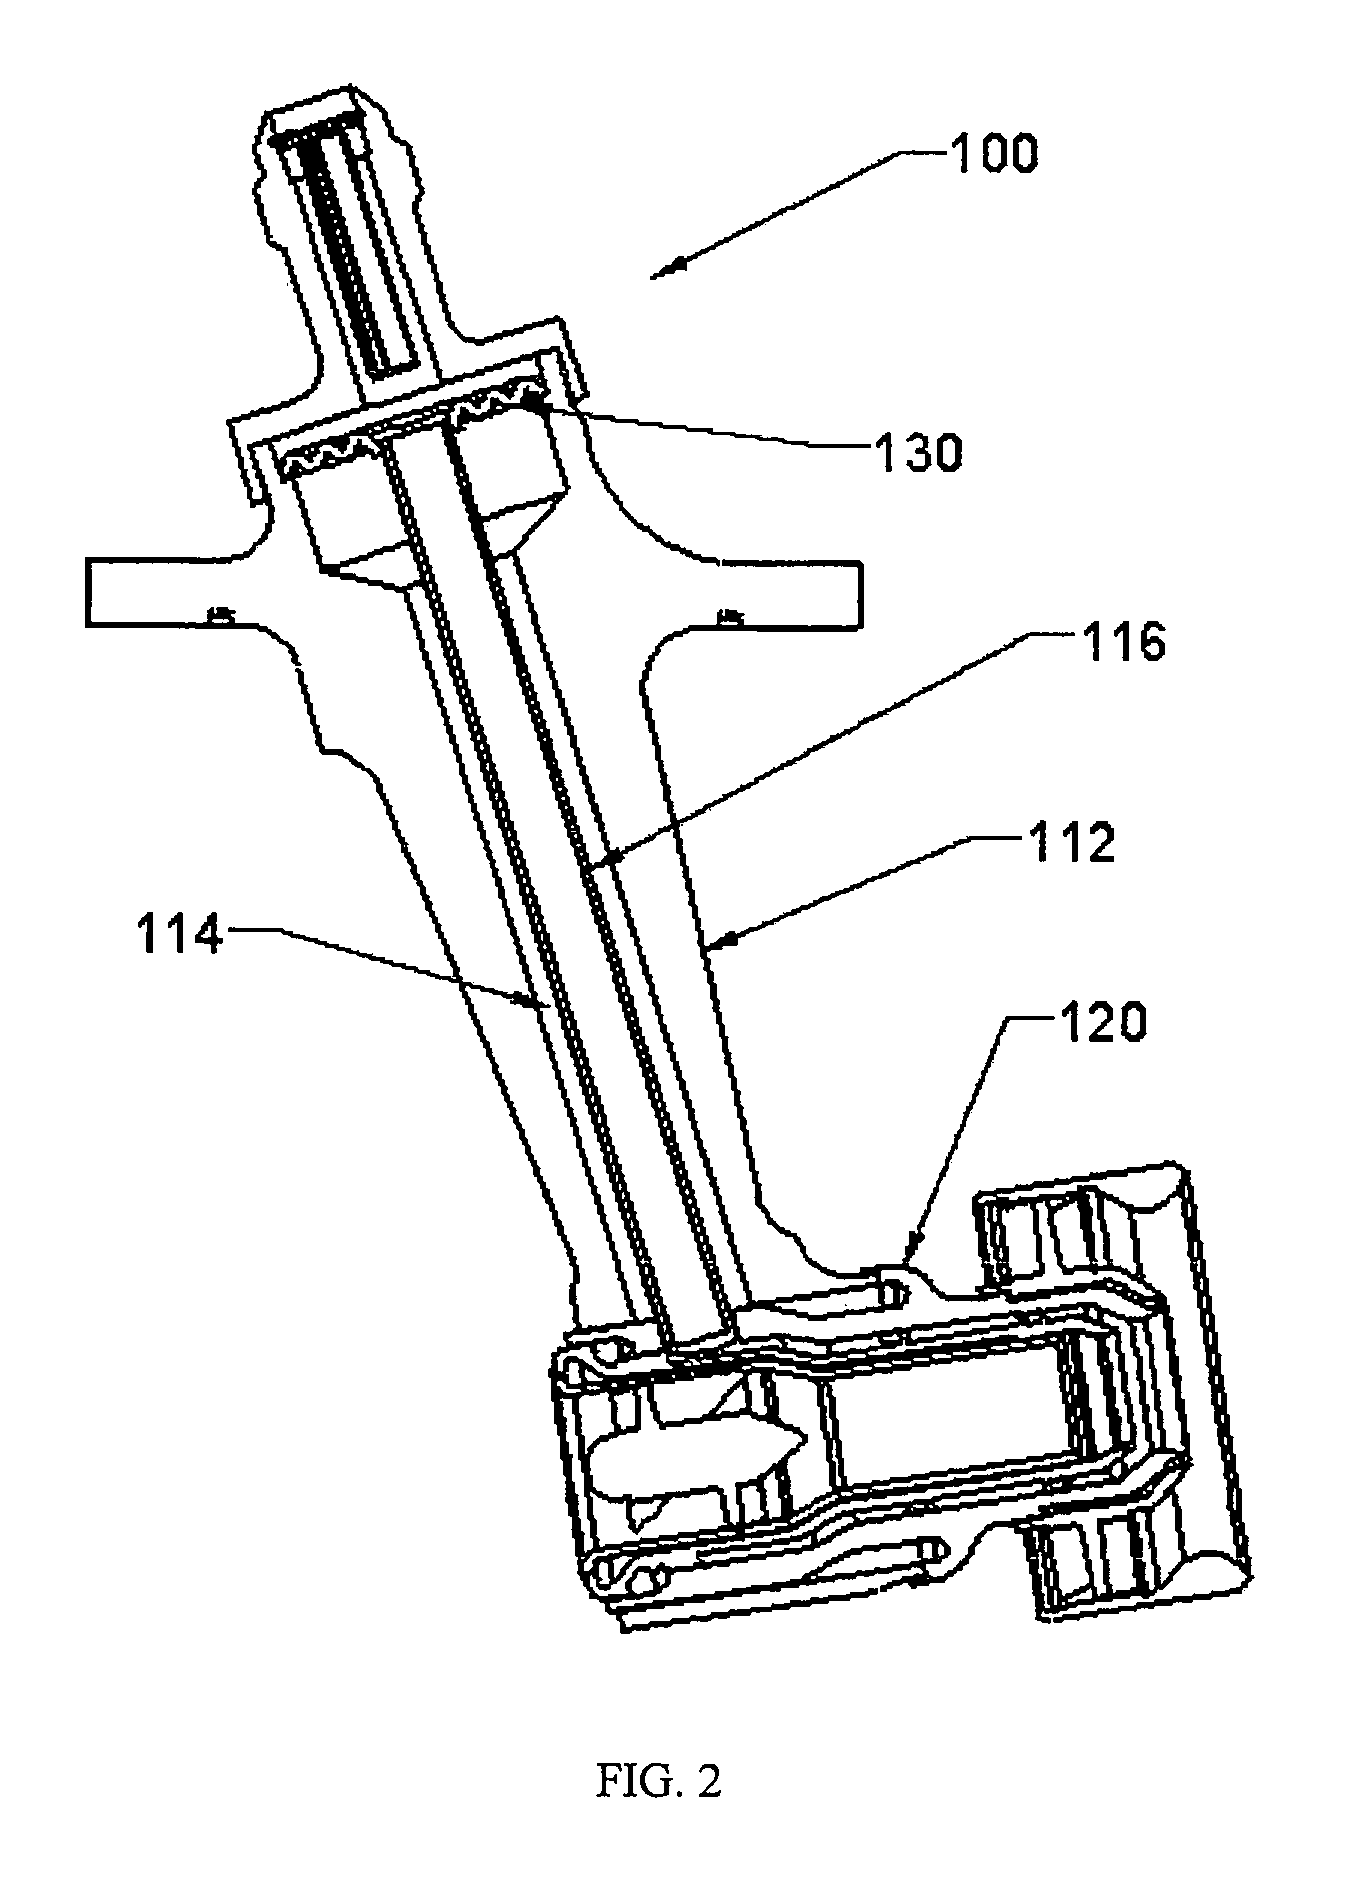 Apparatus and method to compensate for differential thermal growth of injector components